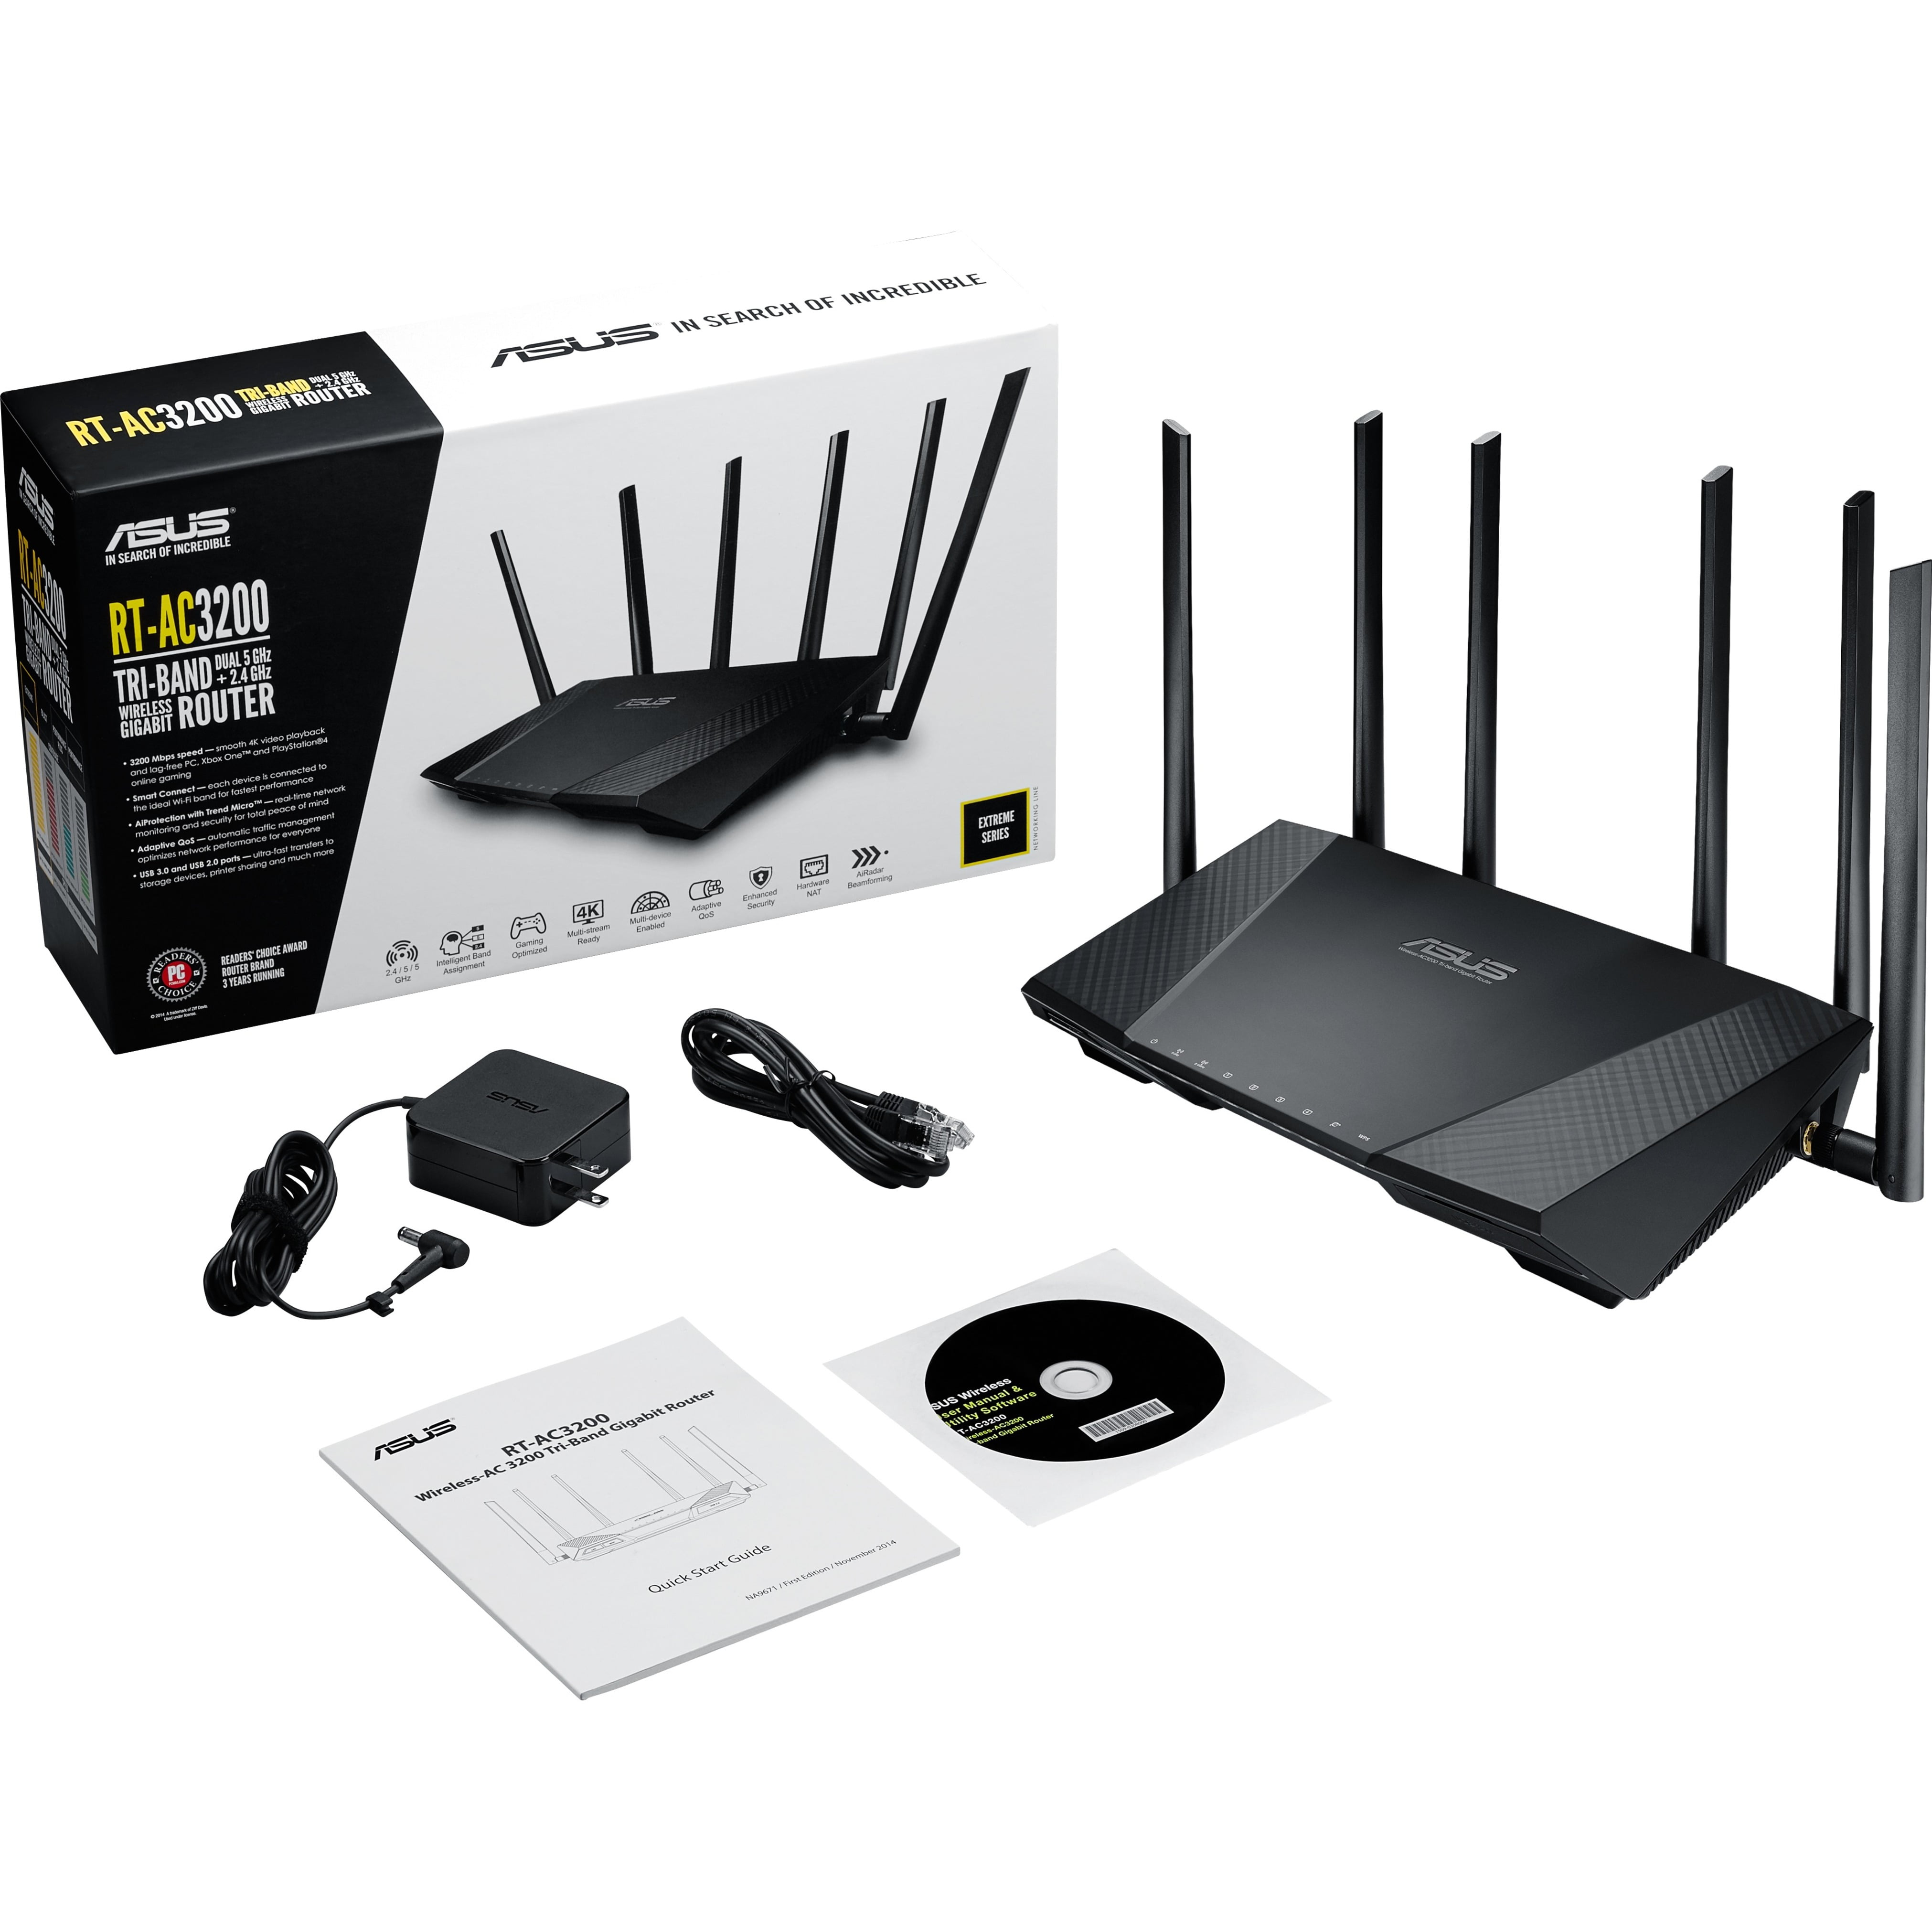 delicacy Patience combination Asus RT-AC3200 Wi-Fi 5 IEEE 802.11ac Ethernet Wireless Router - Walmart.com